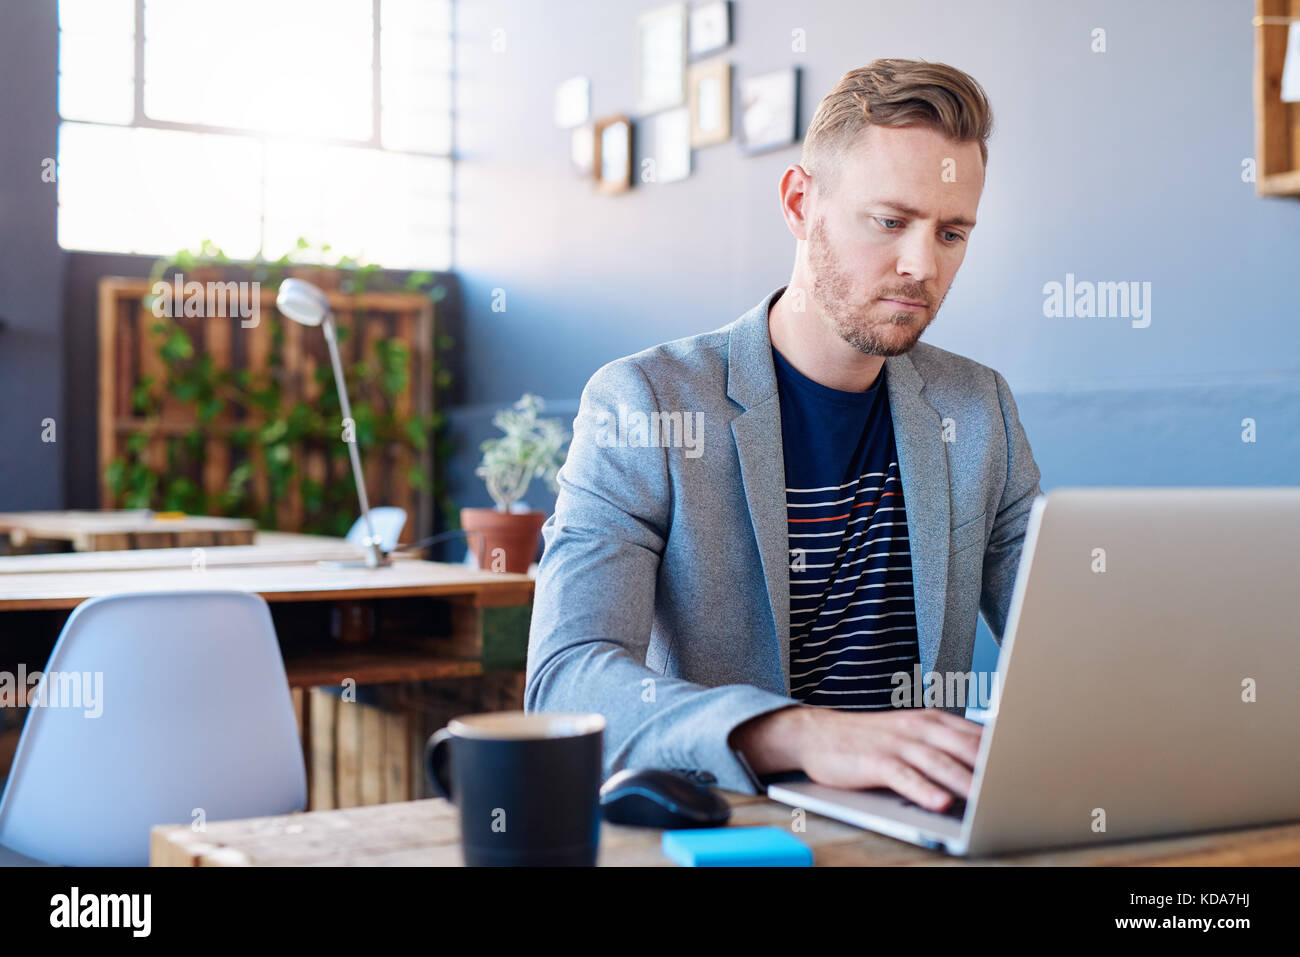 Focused young businessman working on a laptop in an office Stock Photo